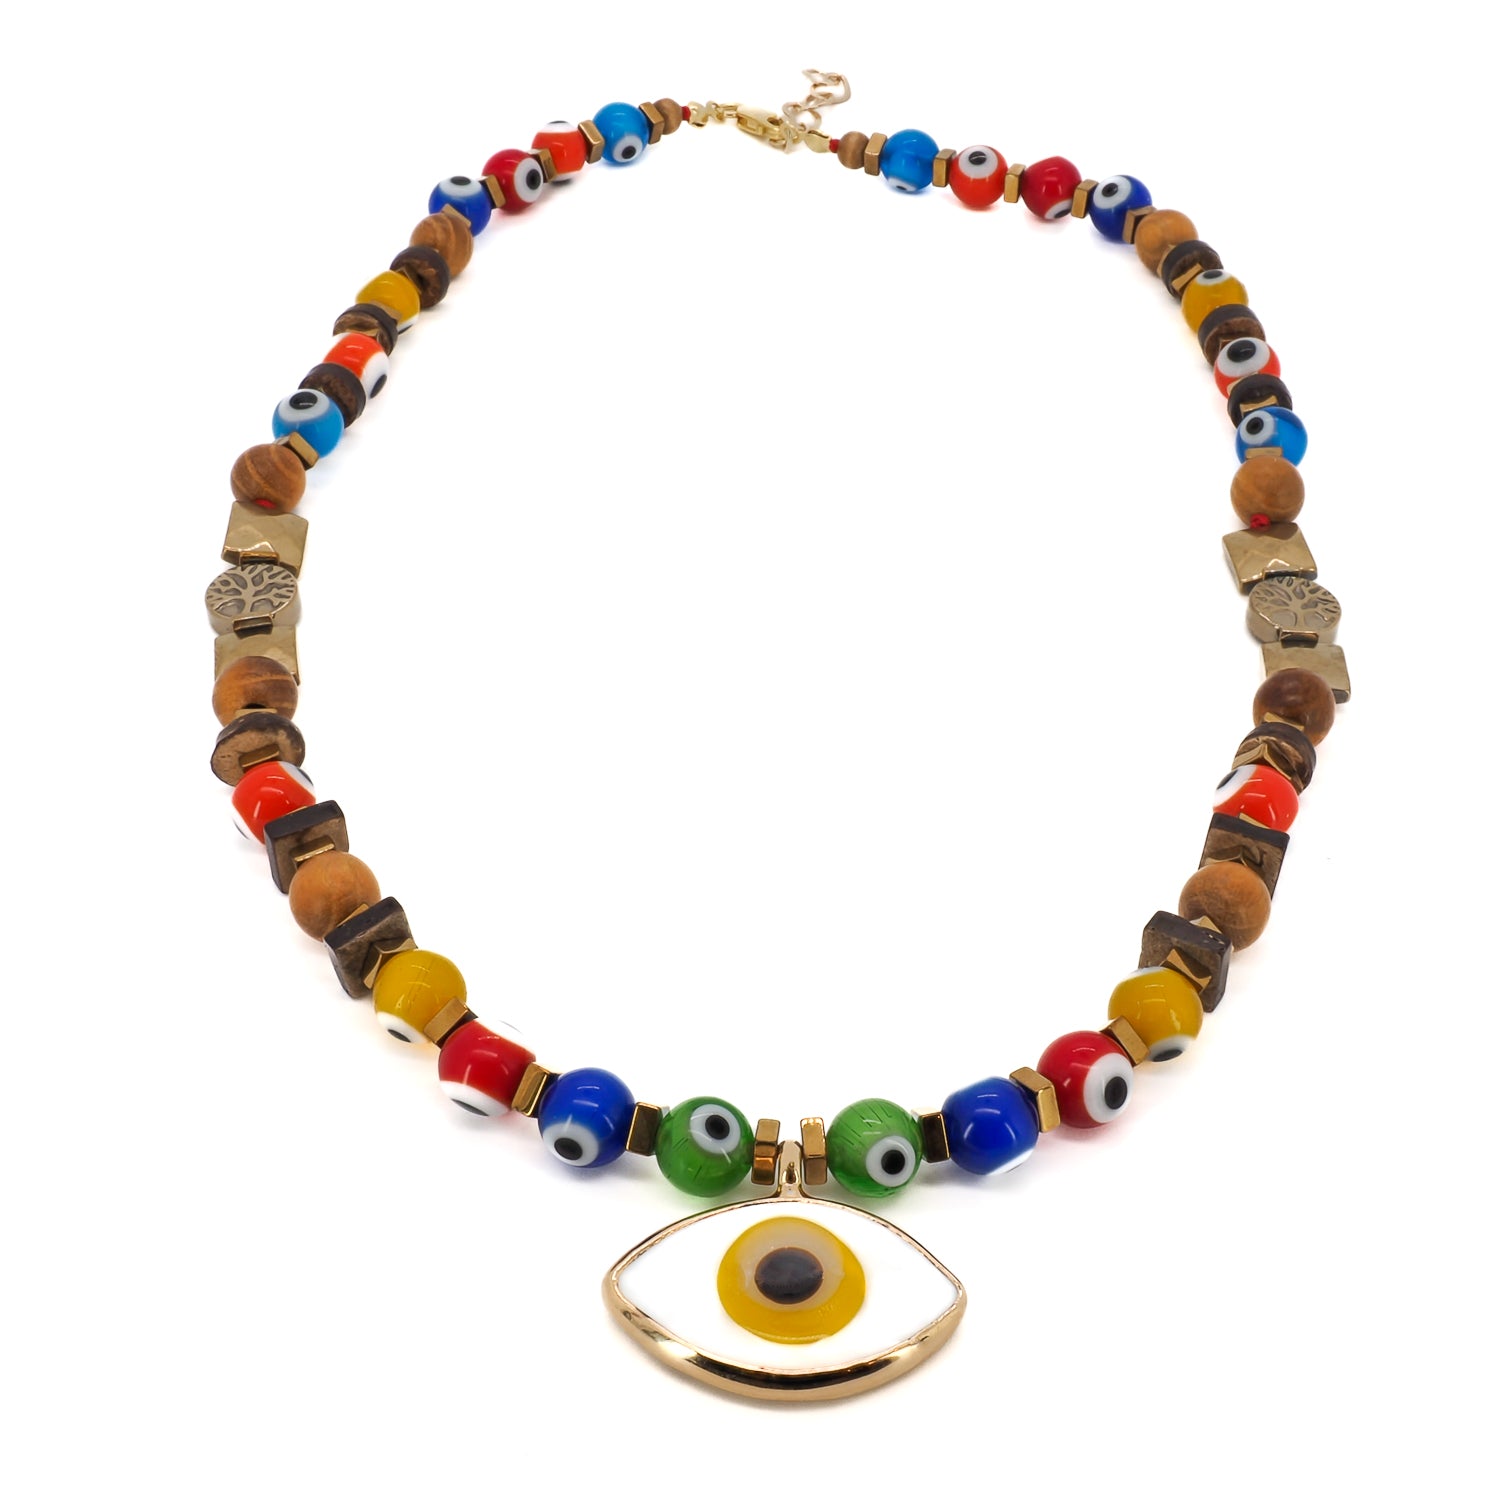 Handcrafted Evil Eye Necklace - A close-up of the intricate details of the Evil Eye Beaded Necklace, showcasing the colorful glass evil eye beads, gold hematite stone beads, and the tree of life pendant. 